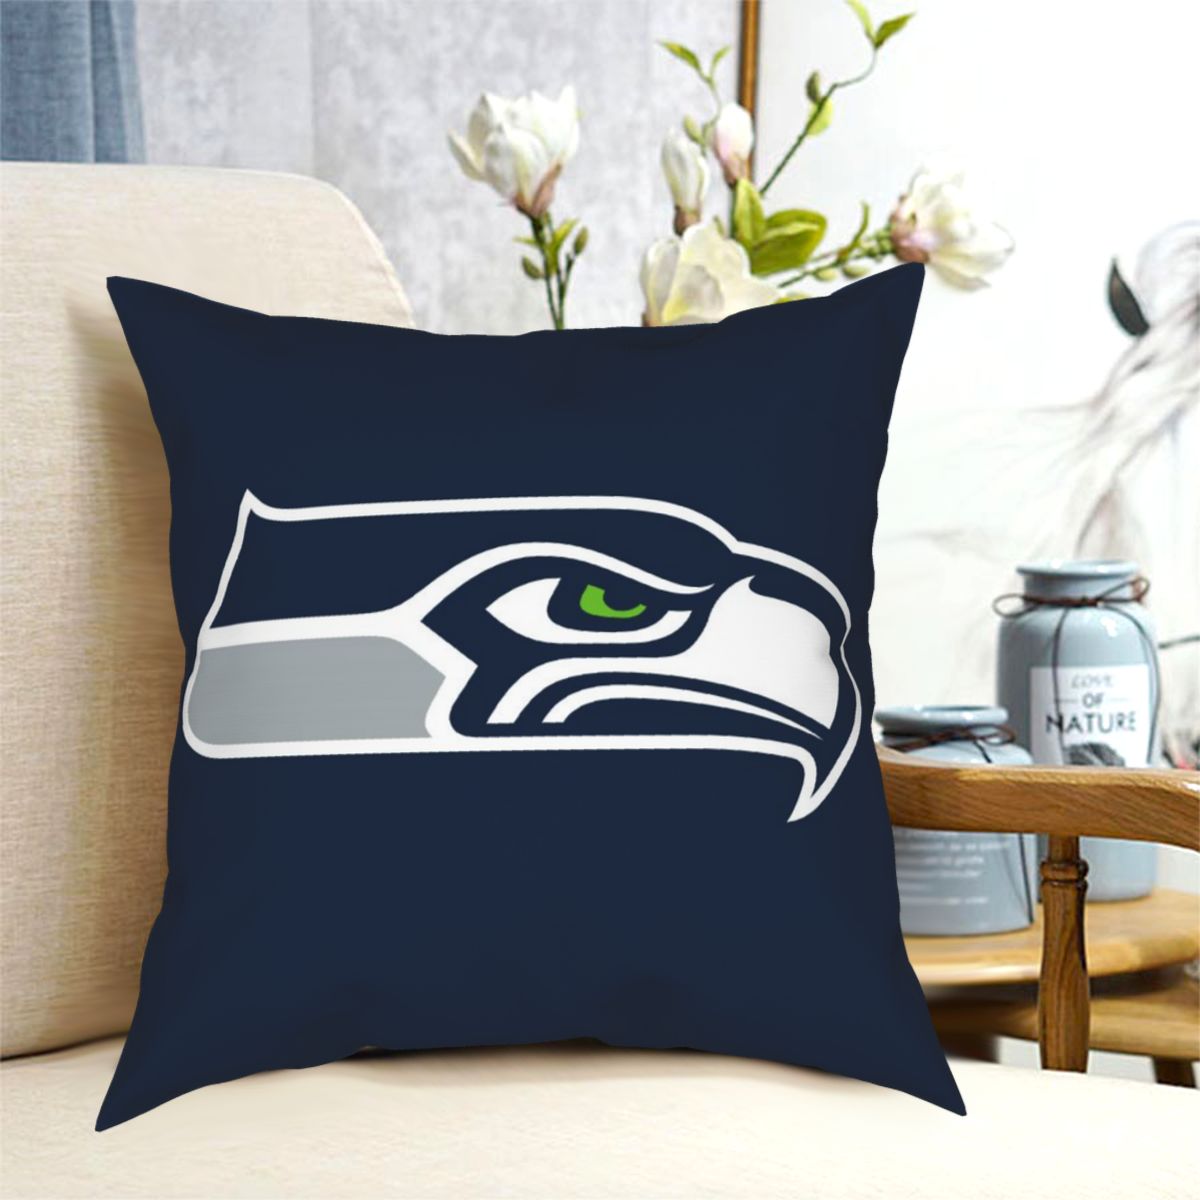 Custom Decorative Football Pillow Case Seattle Seahawks Navy Pillowcase Personalized Throw Pillow Covers